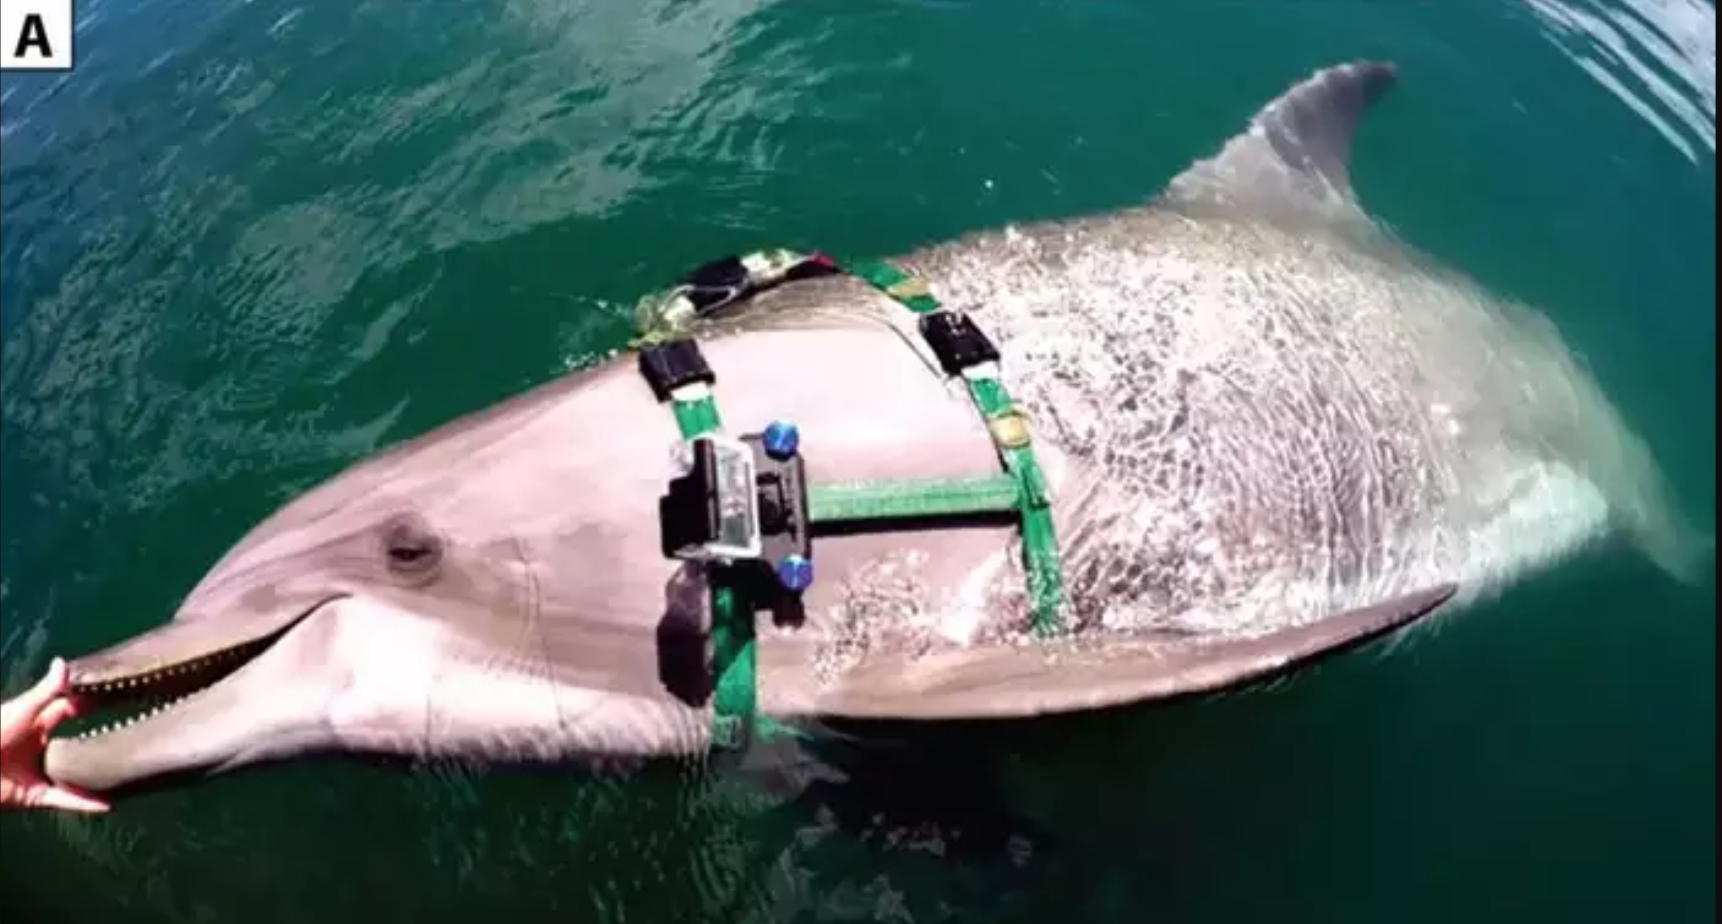 Crazy Footage From Go Pro Attached To Dolphin Shows It Devouring 8 Extremely Venomous Sea Snakes